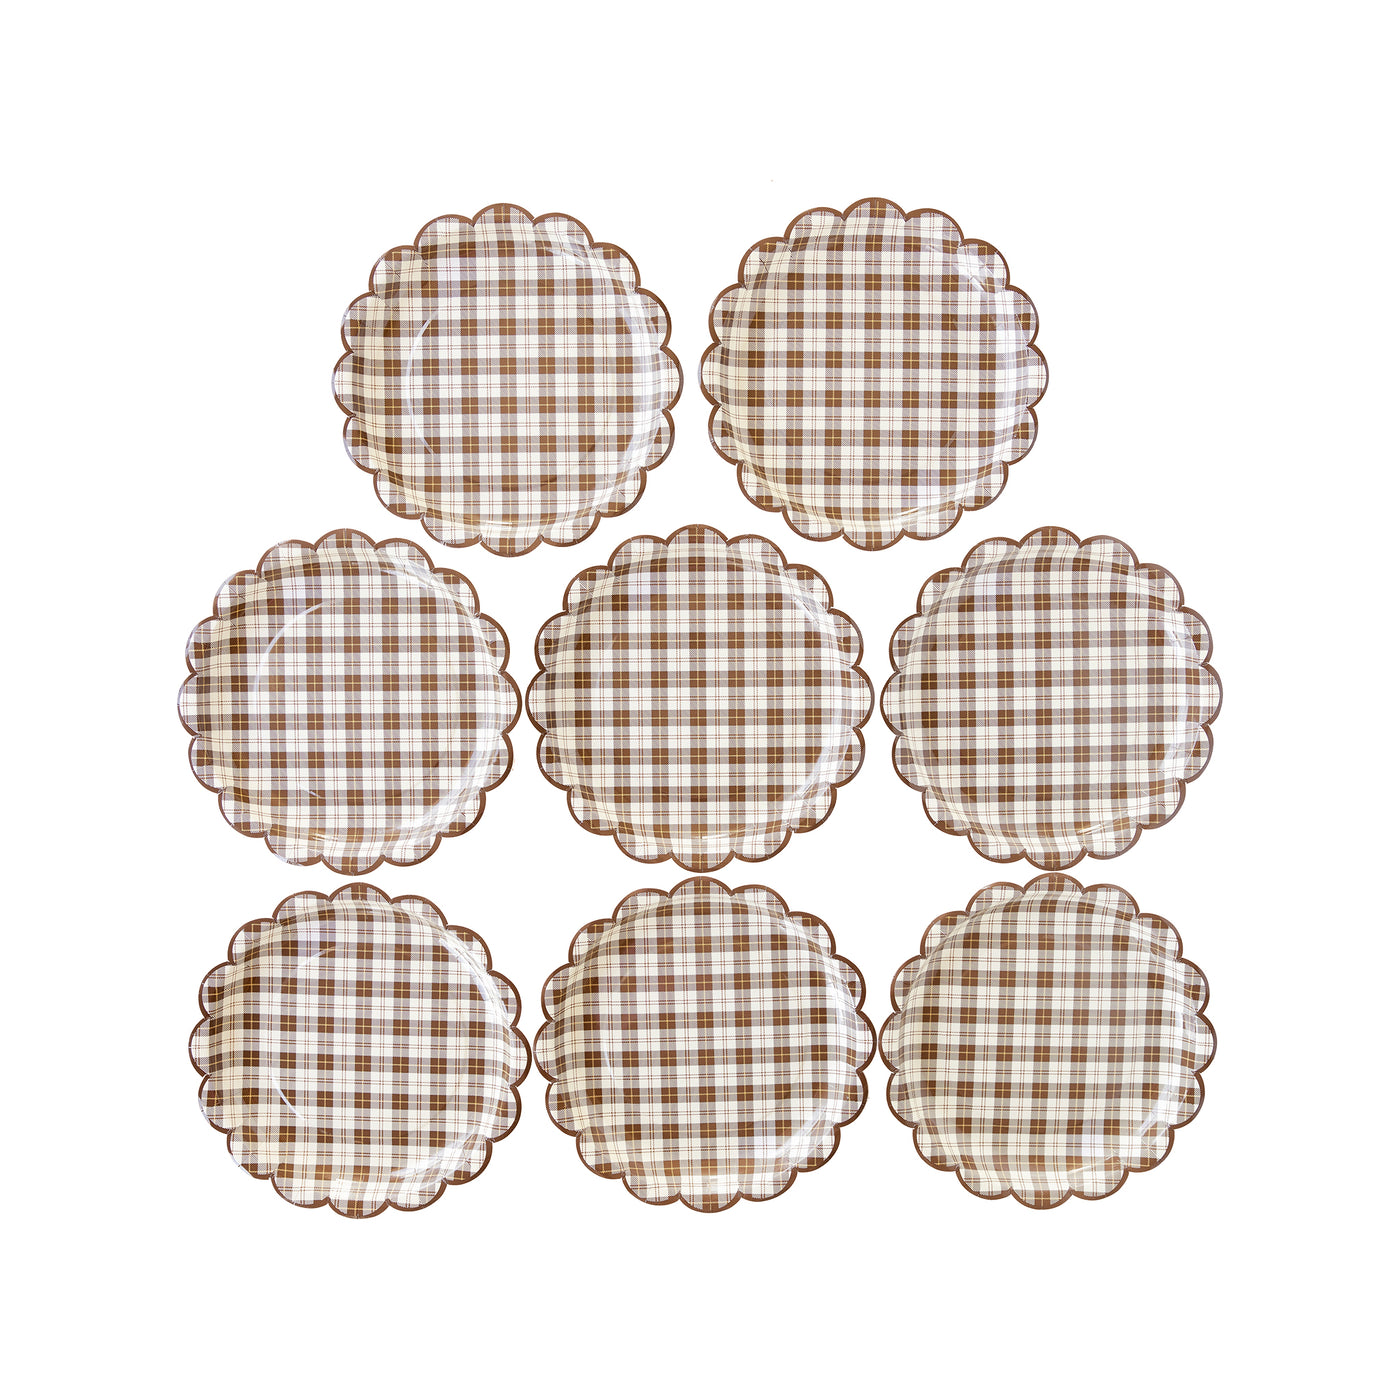 THP1044 - Harvest Scallop Brown Plaid Paper Plate